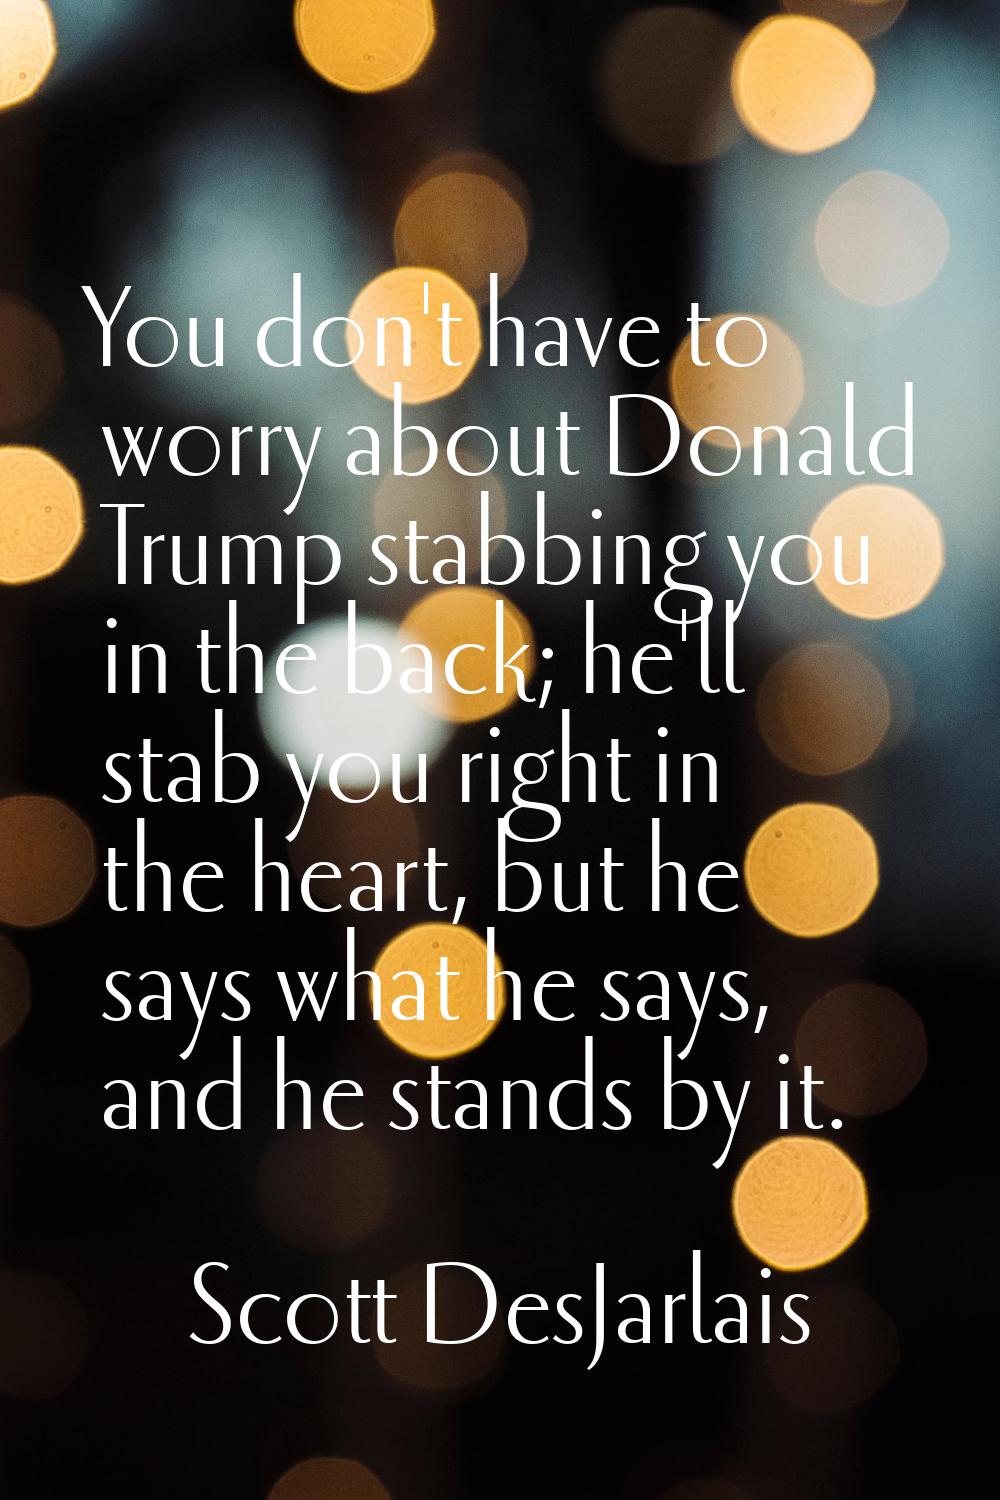 You don't have to worry about Donald Trump stabbing you in the back; he'll stab you right in the he